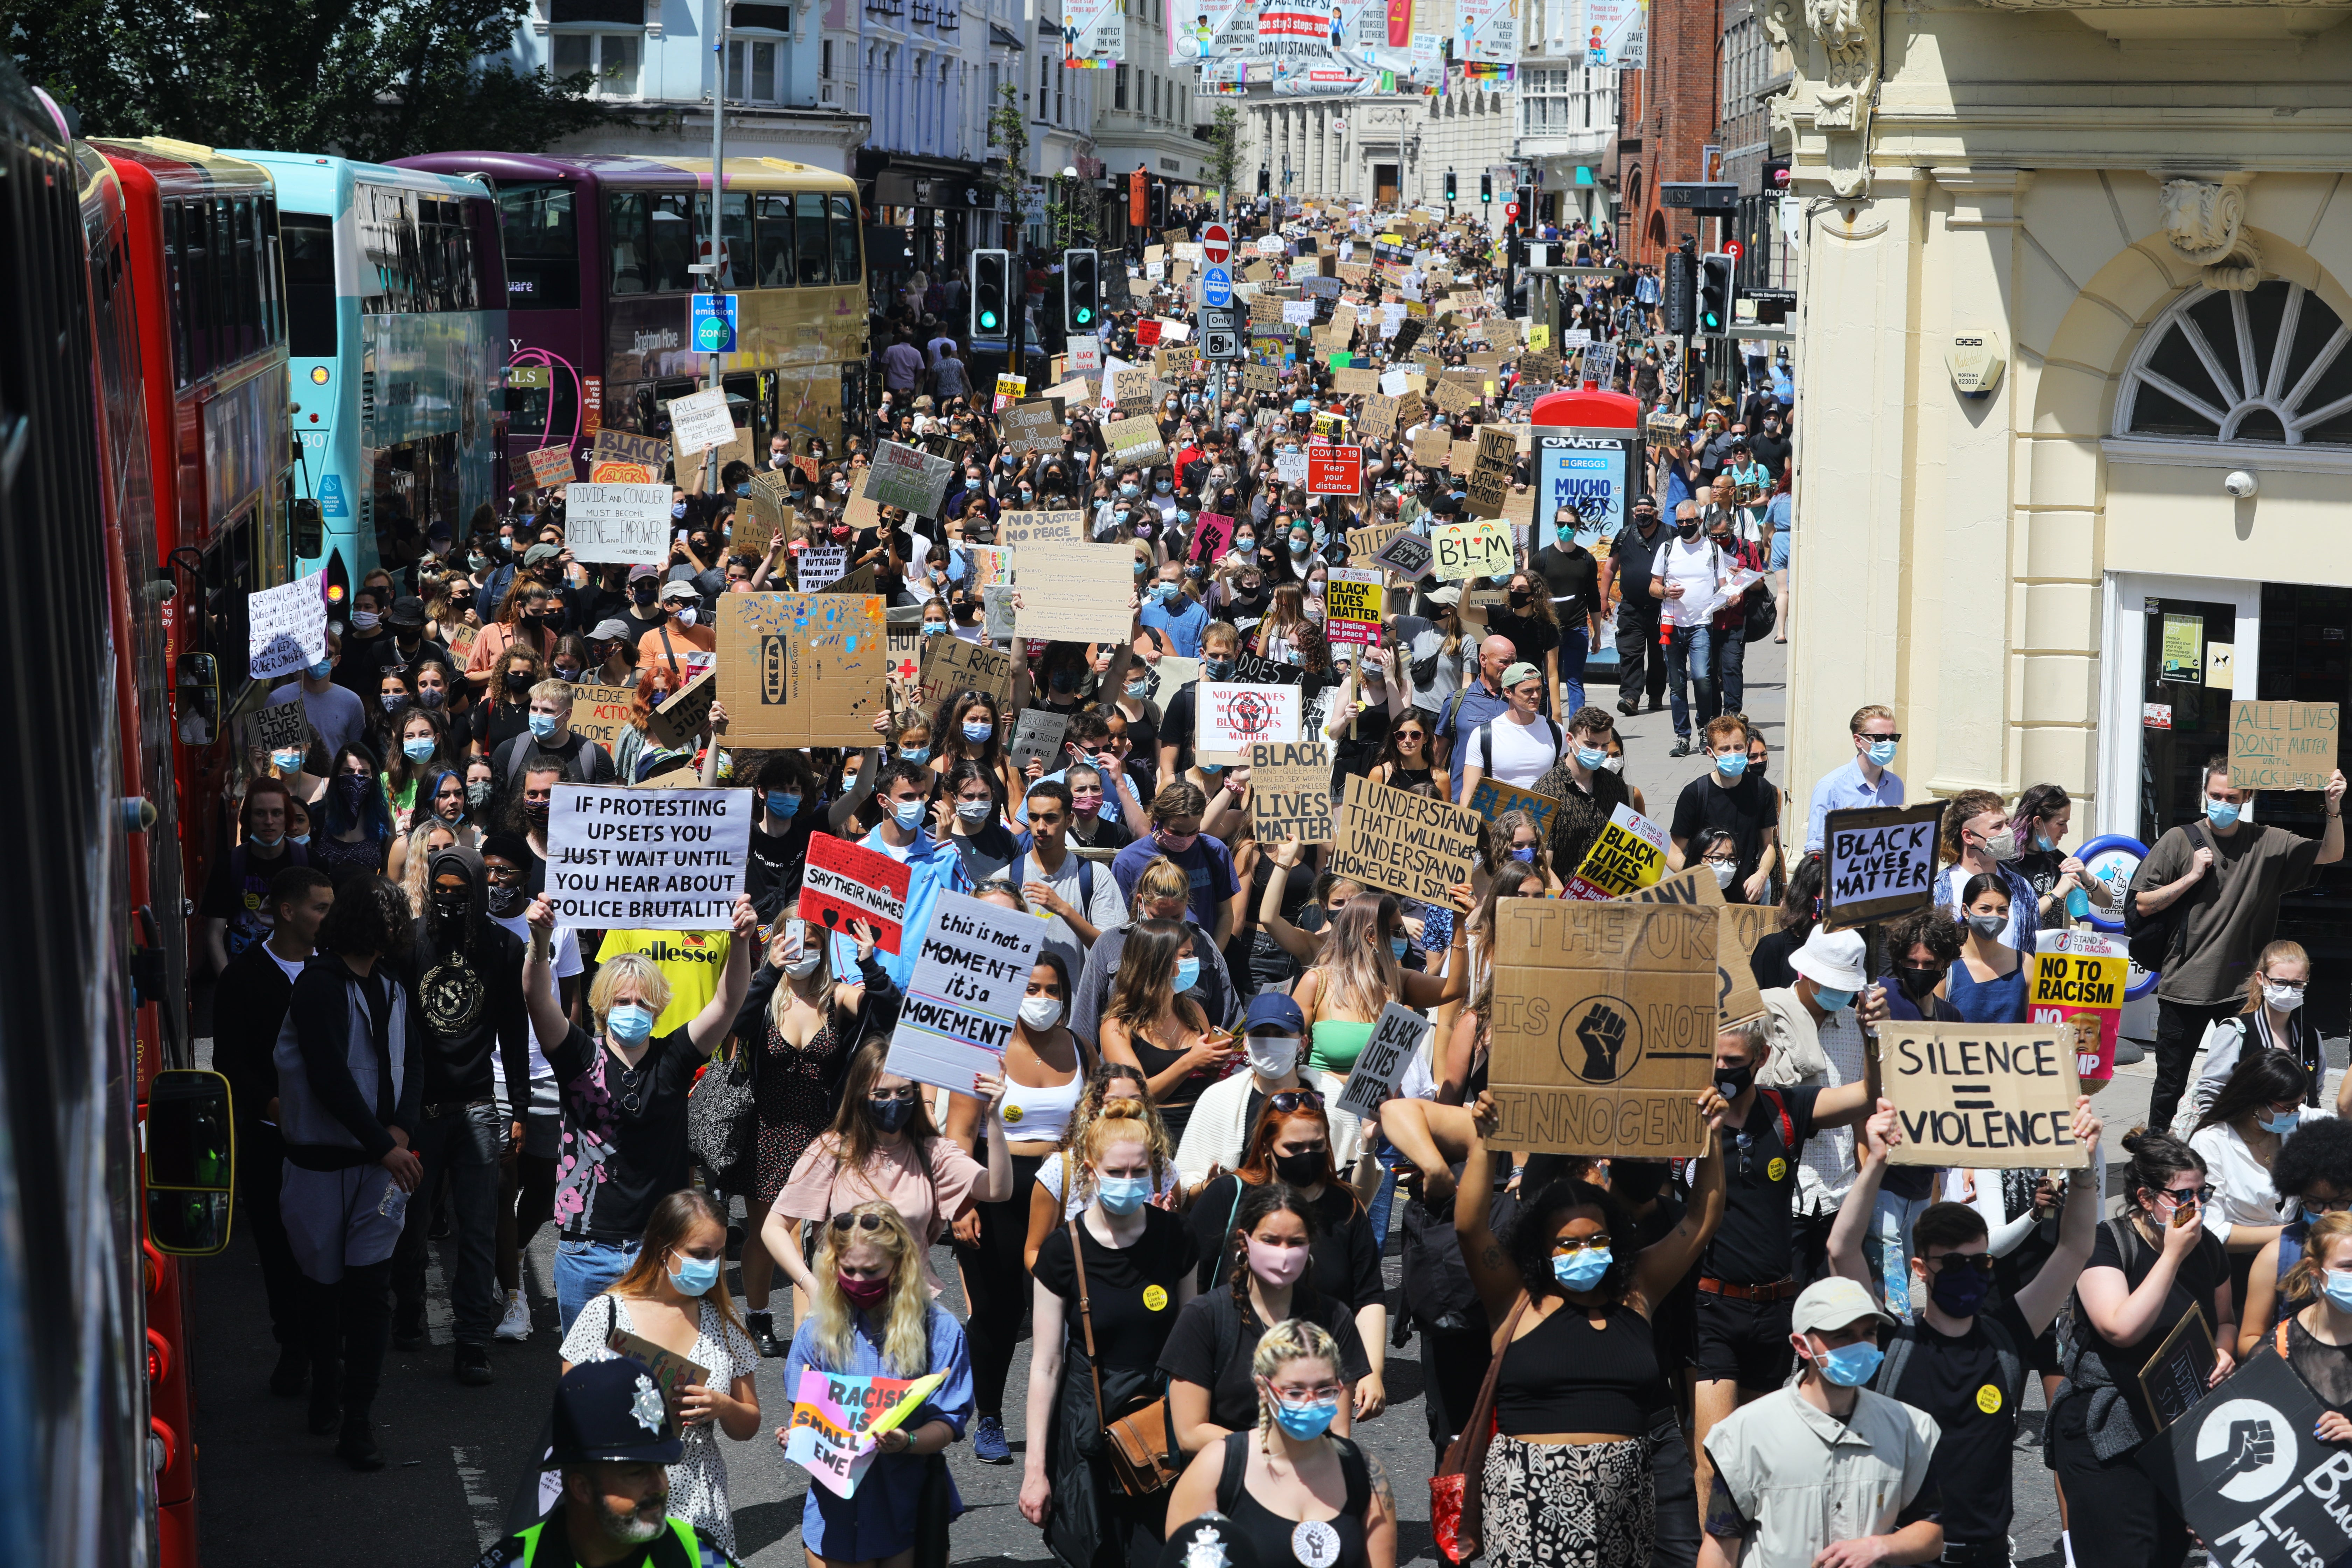 People take part in a Black Lives Matter protest in Brighton, sparked by the death of George Floyd